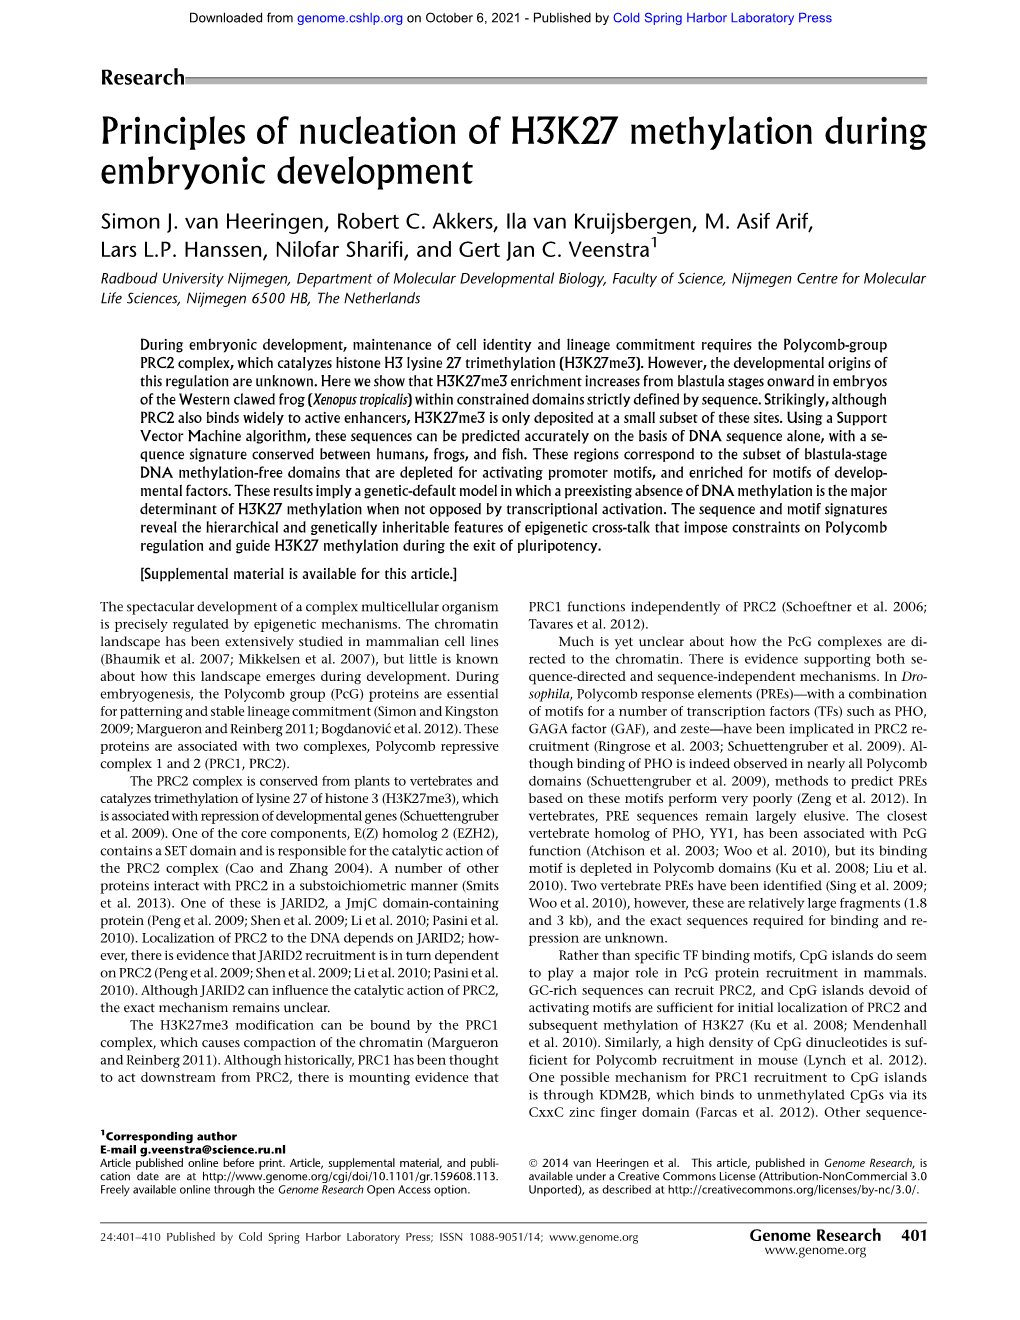 Principles of Nucleation of H3K27 Methylation During Embryonic Development